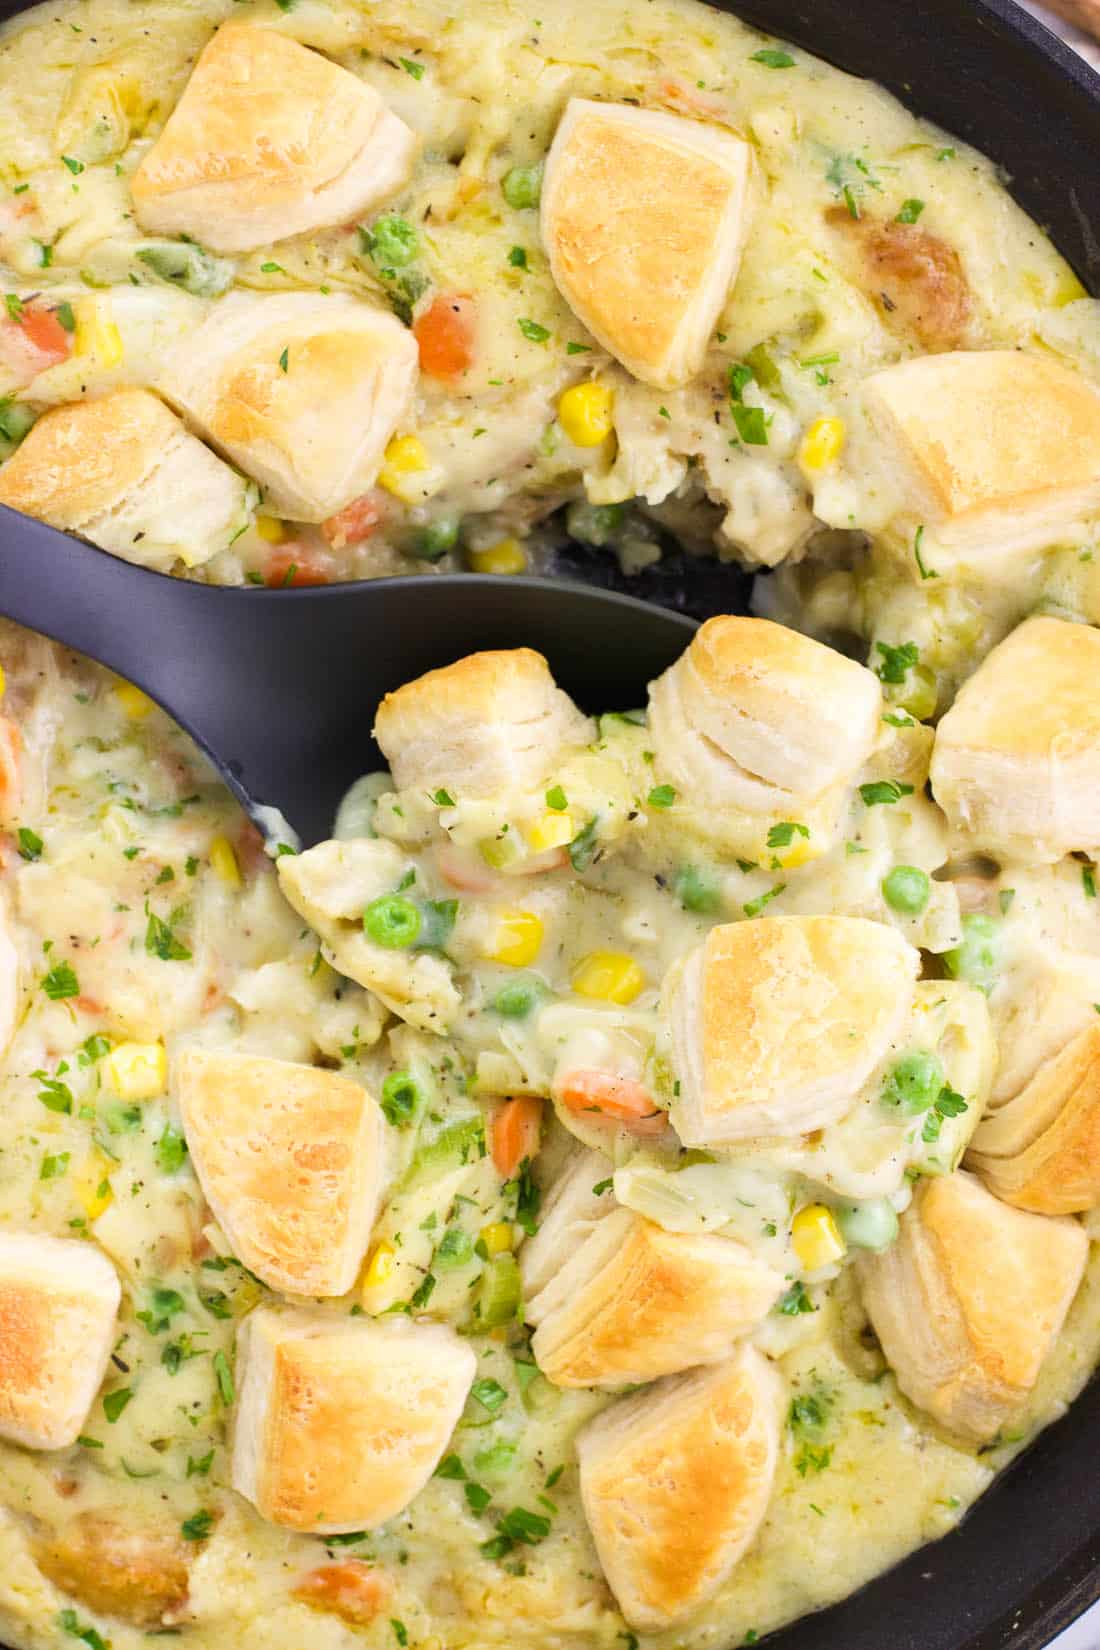 A serving spoon scooped into the skillet pot pie